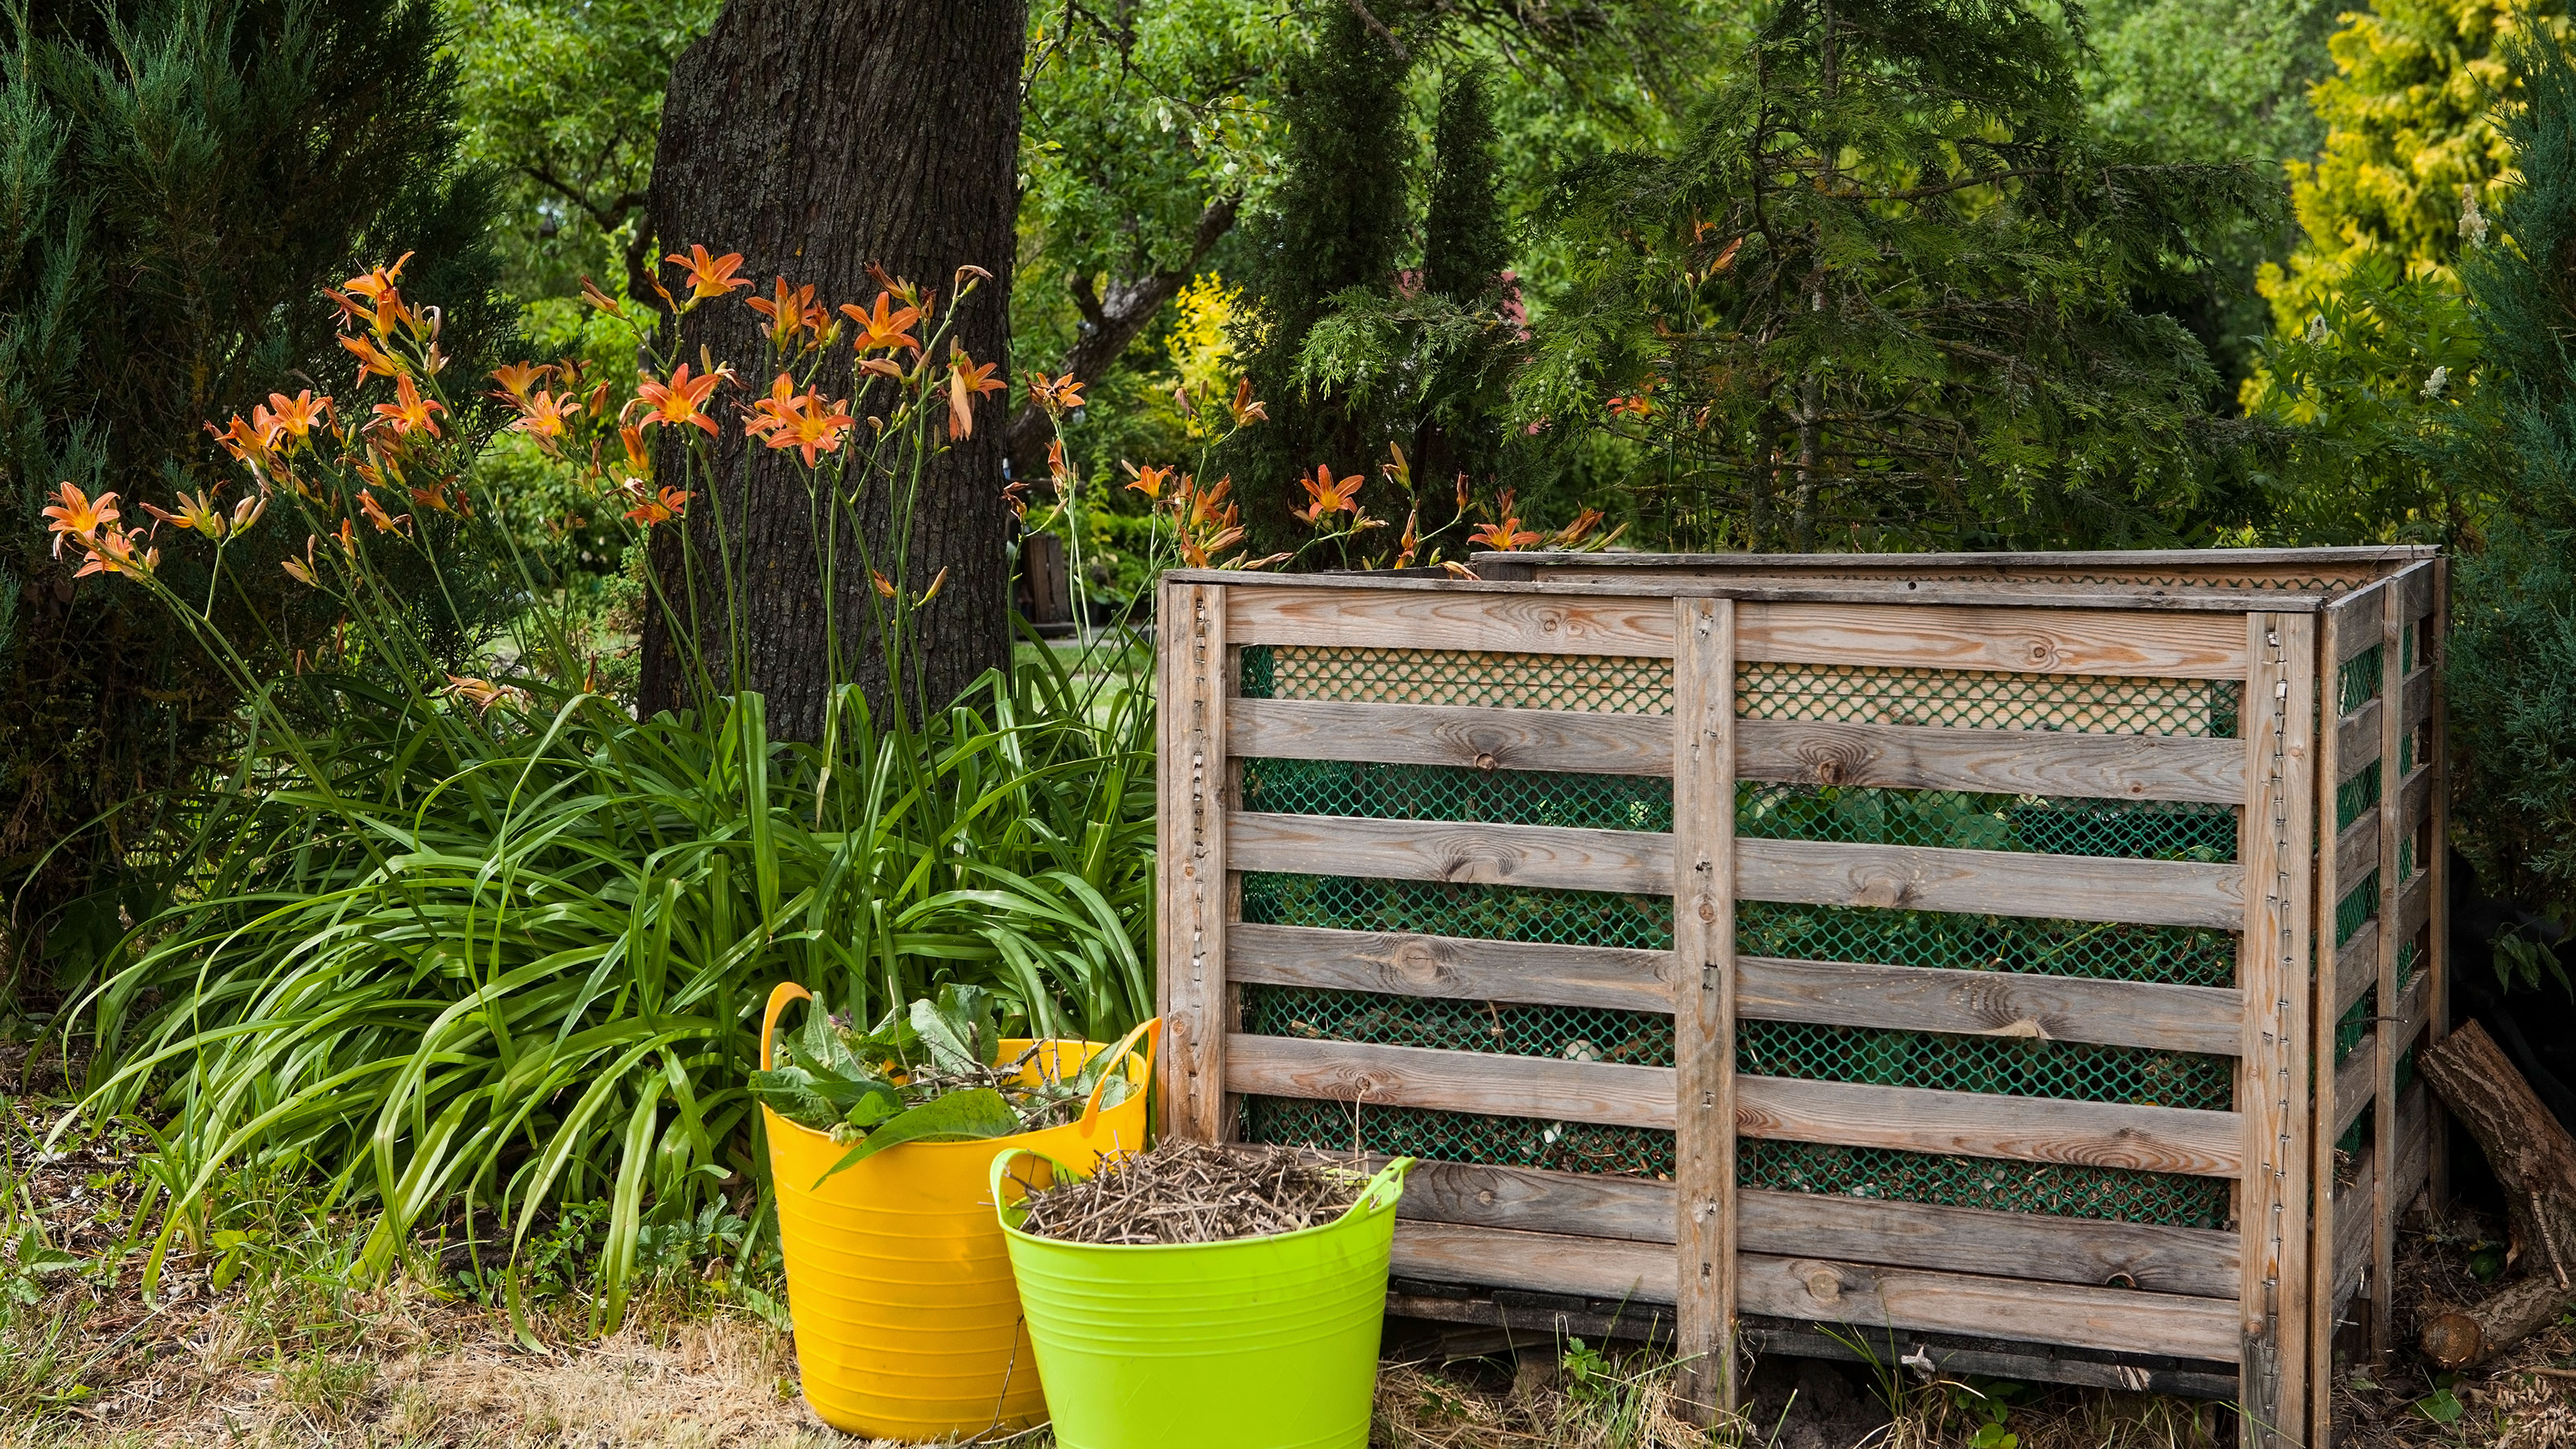 Step-by-step guide to setting up a home composting system